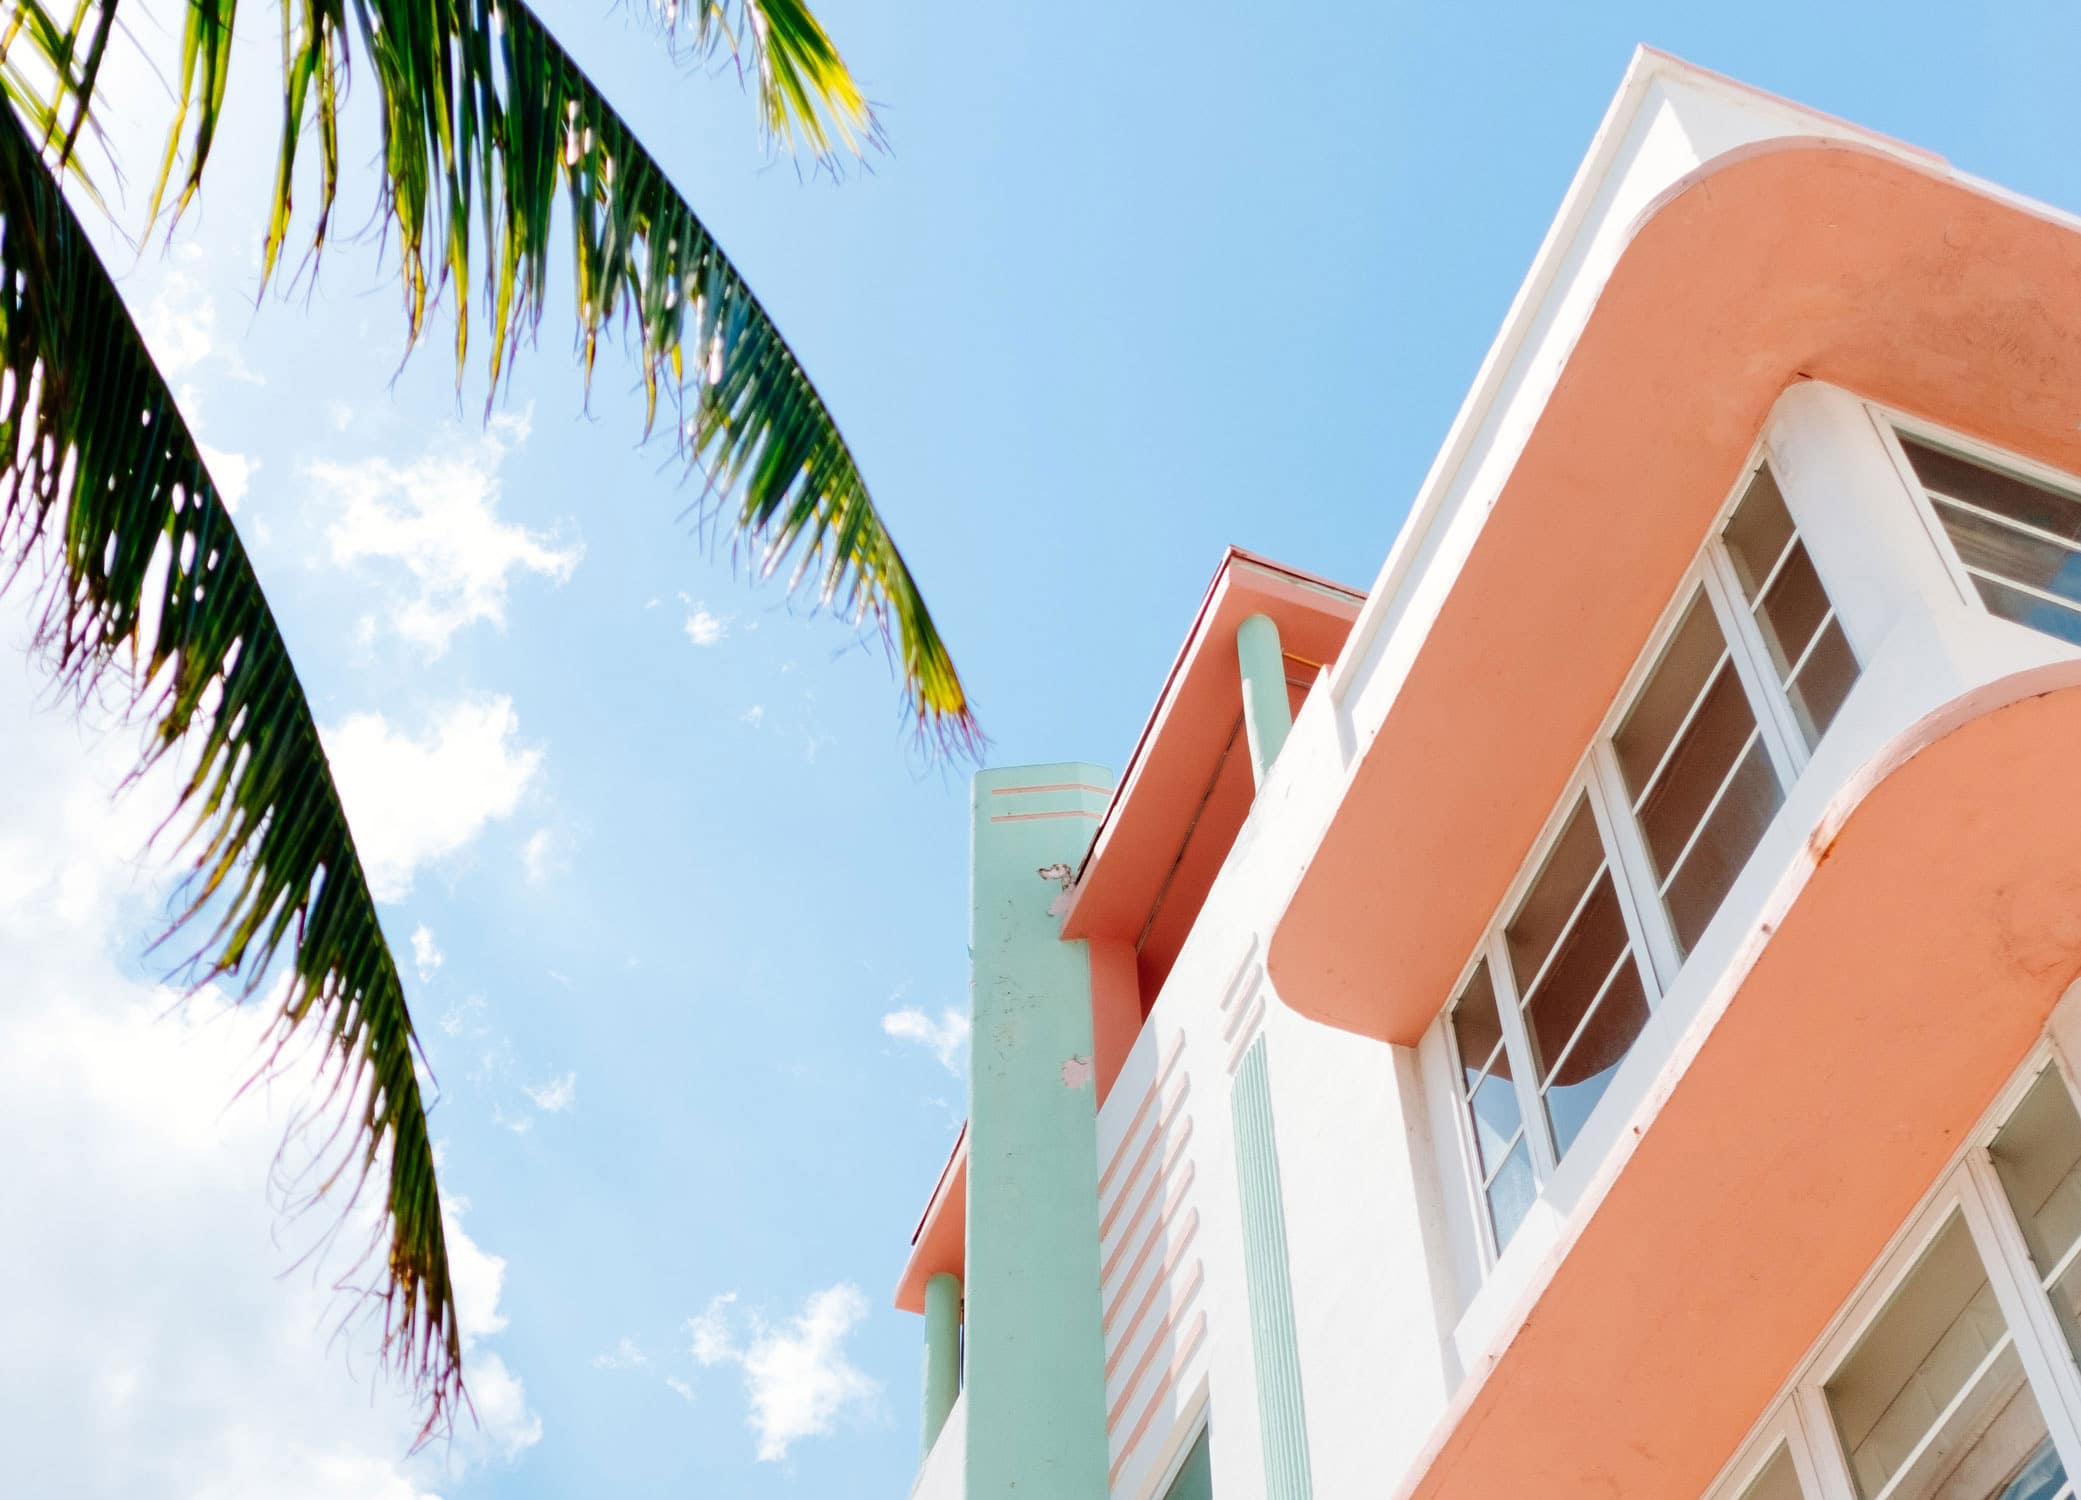 Graphic Design Agency located in Miami Florida, image showing colorful building and palm tree.